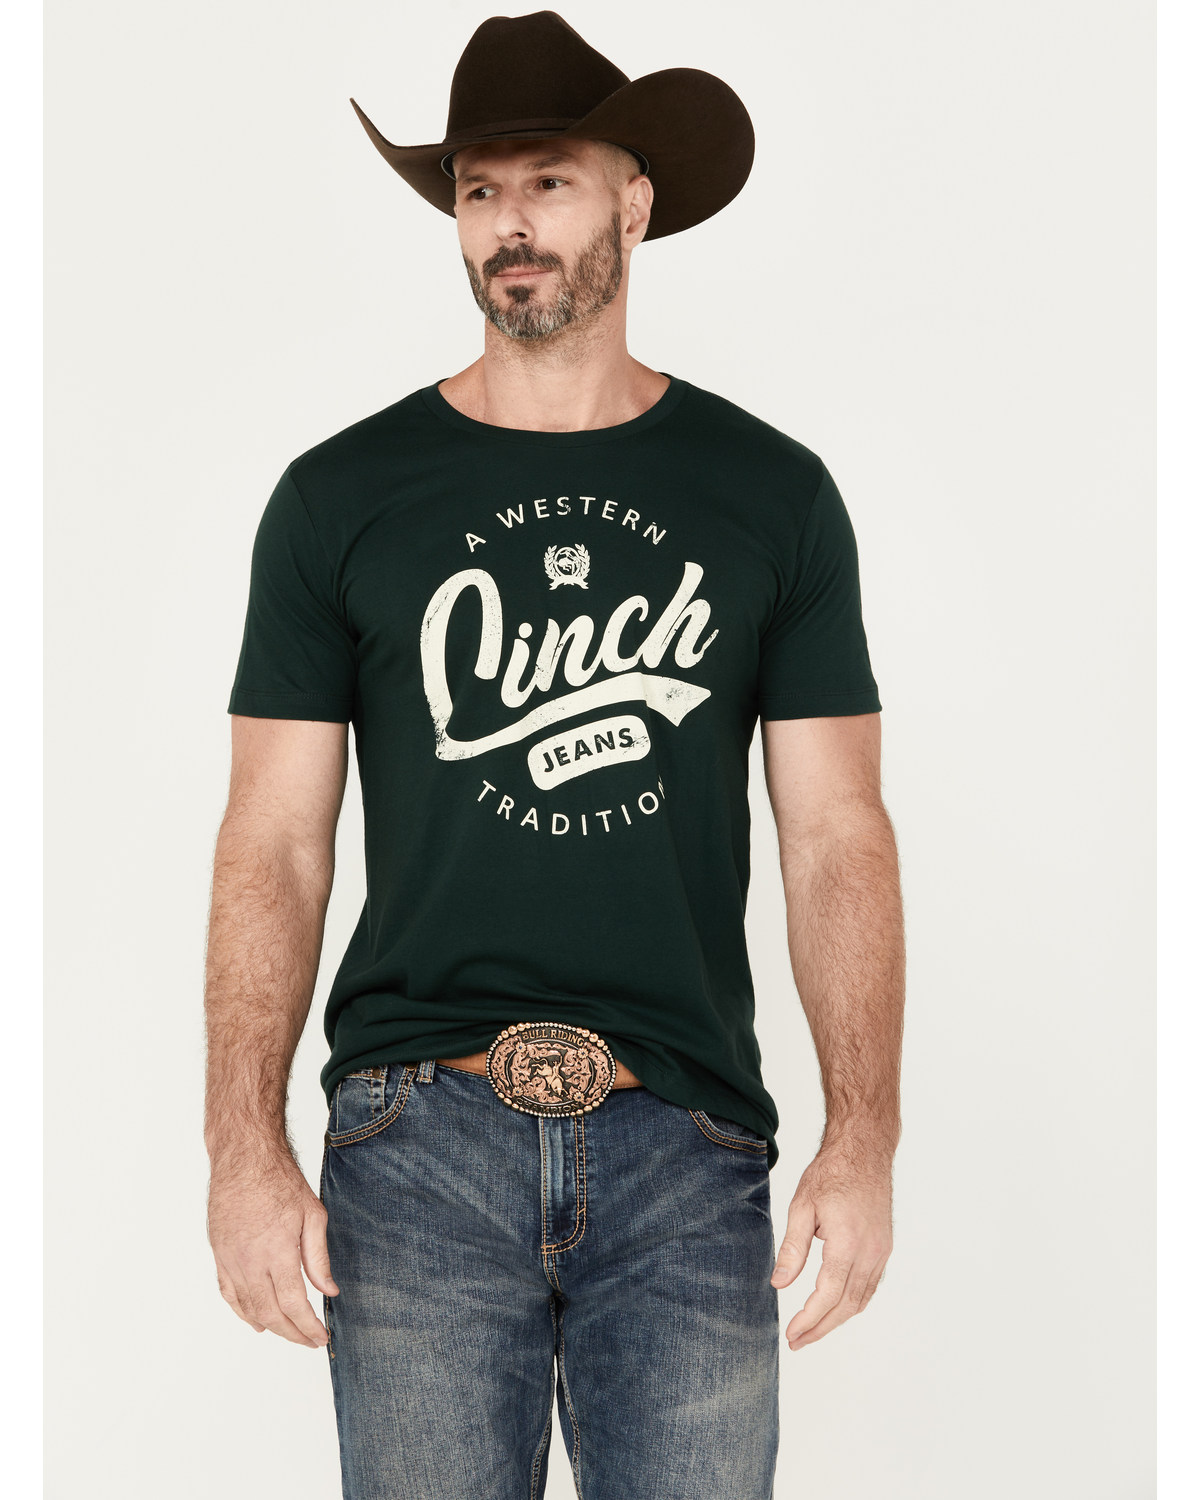 Cinch Men's Western Tradition Short Sleeve Graphic T-Shirt